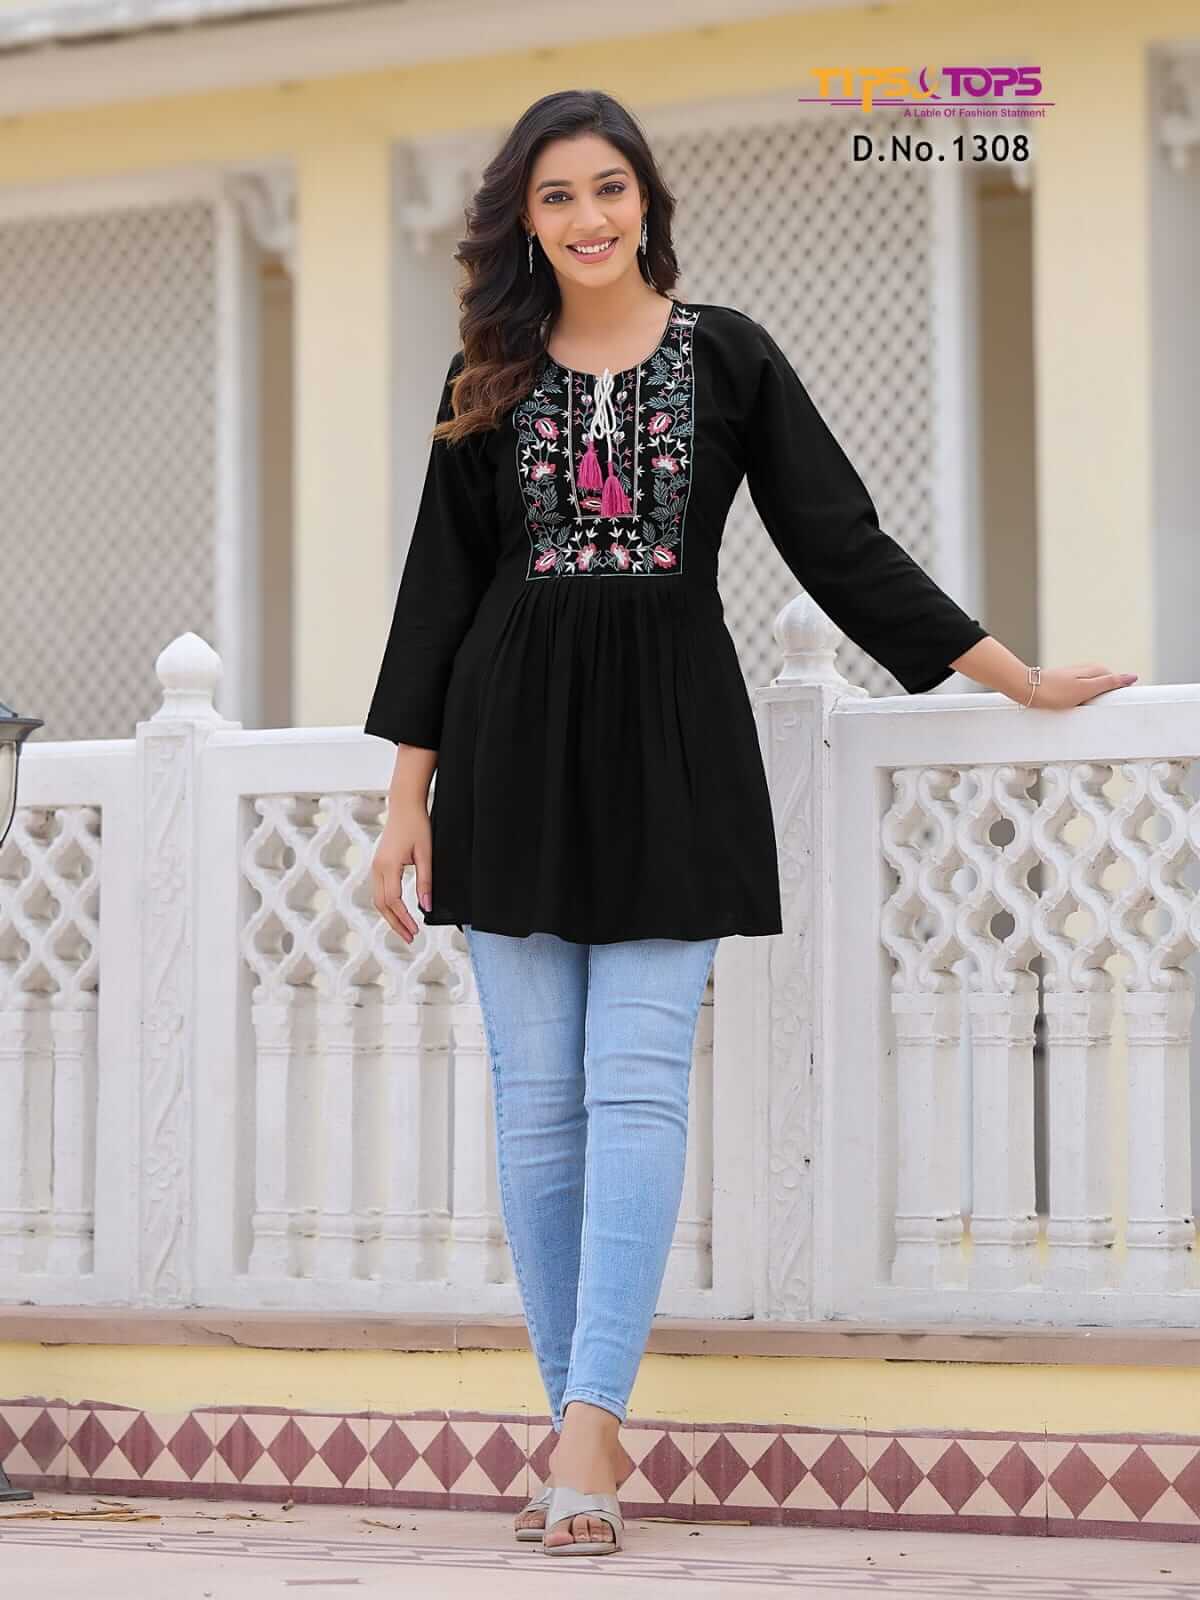 Tips And Tops Bubbly Vol 13 Ladies Tops Catalog collection 9